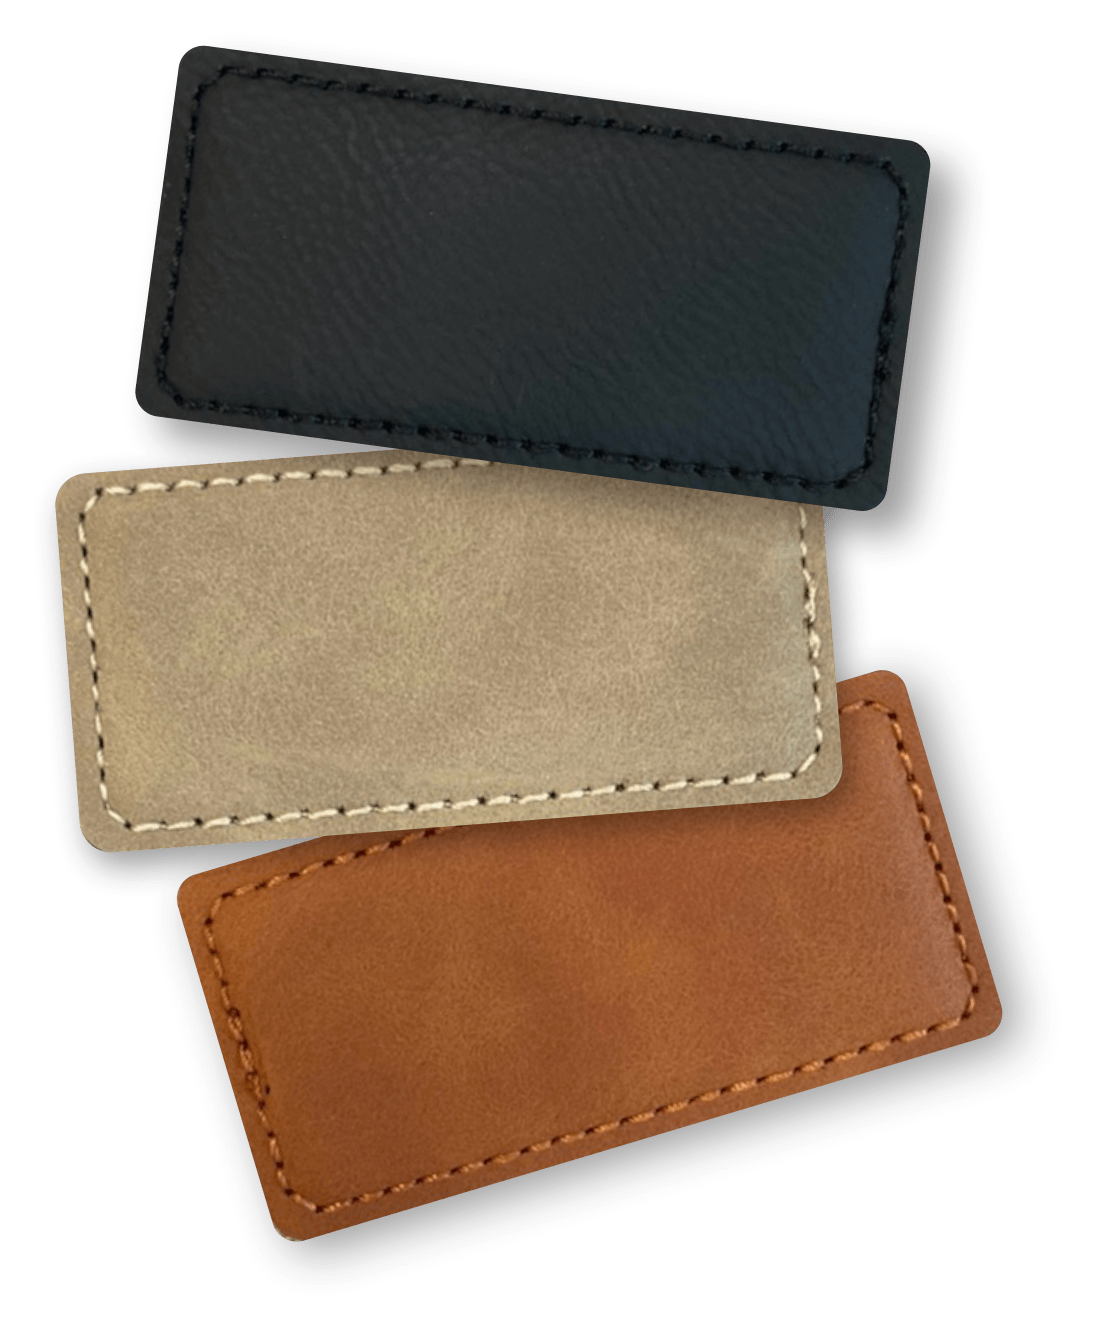 Three leather name tag blanks in black, tan, and brown rectangles